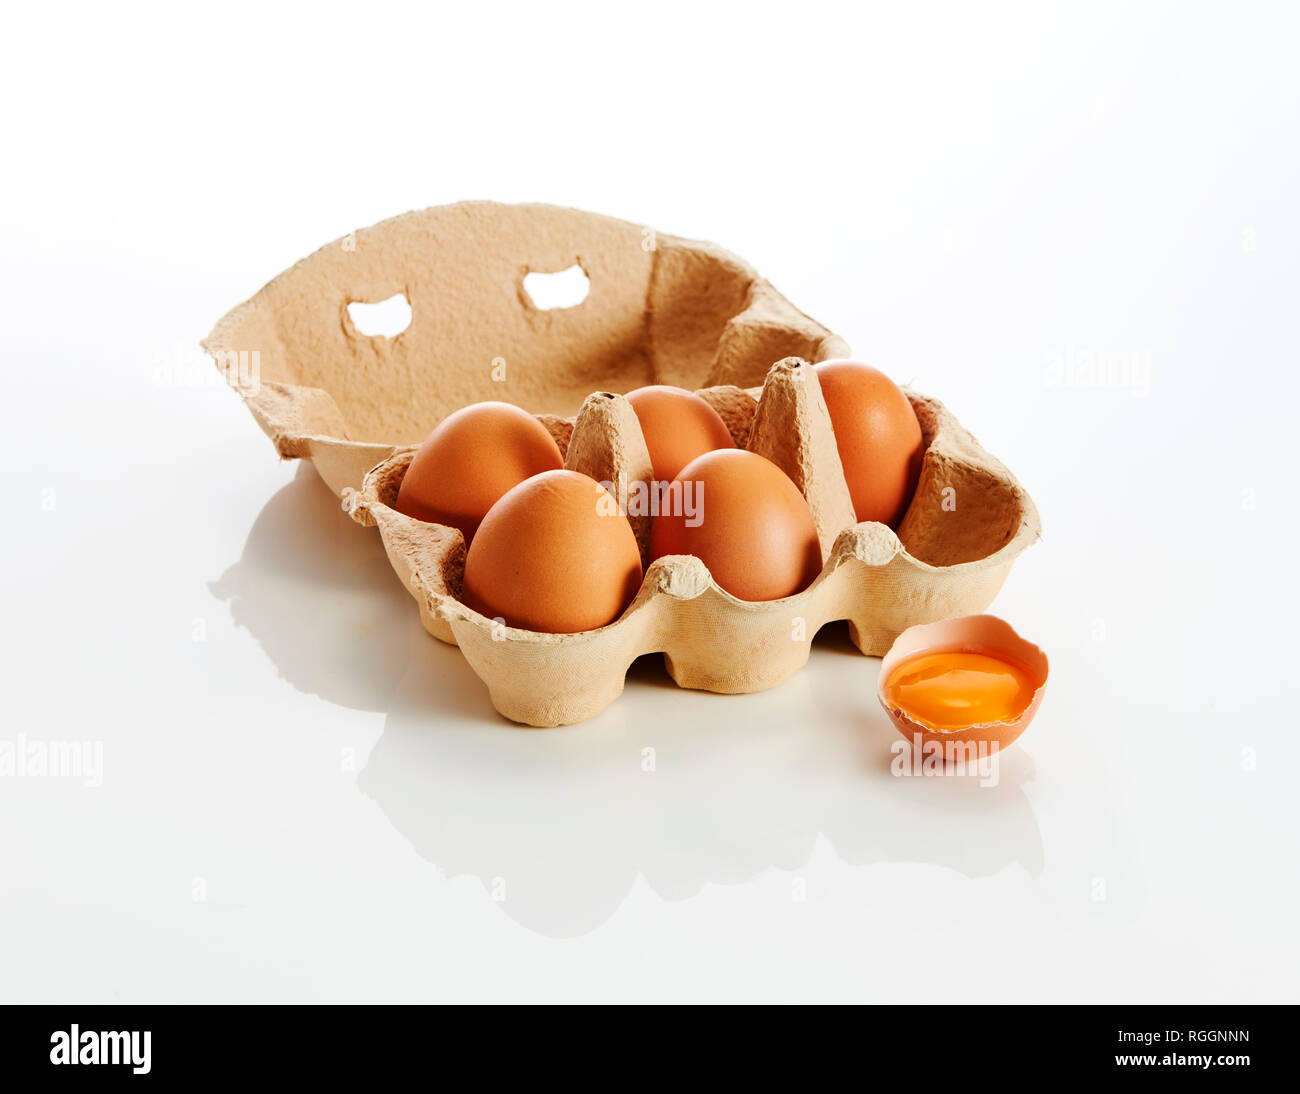 Egg box with brown eggs and an opened egg on white background Stock Photo